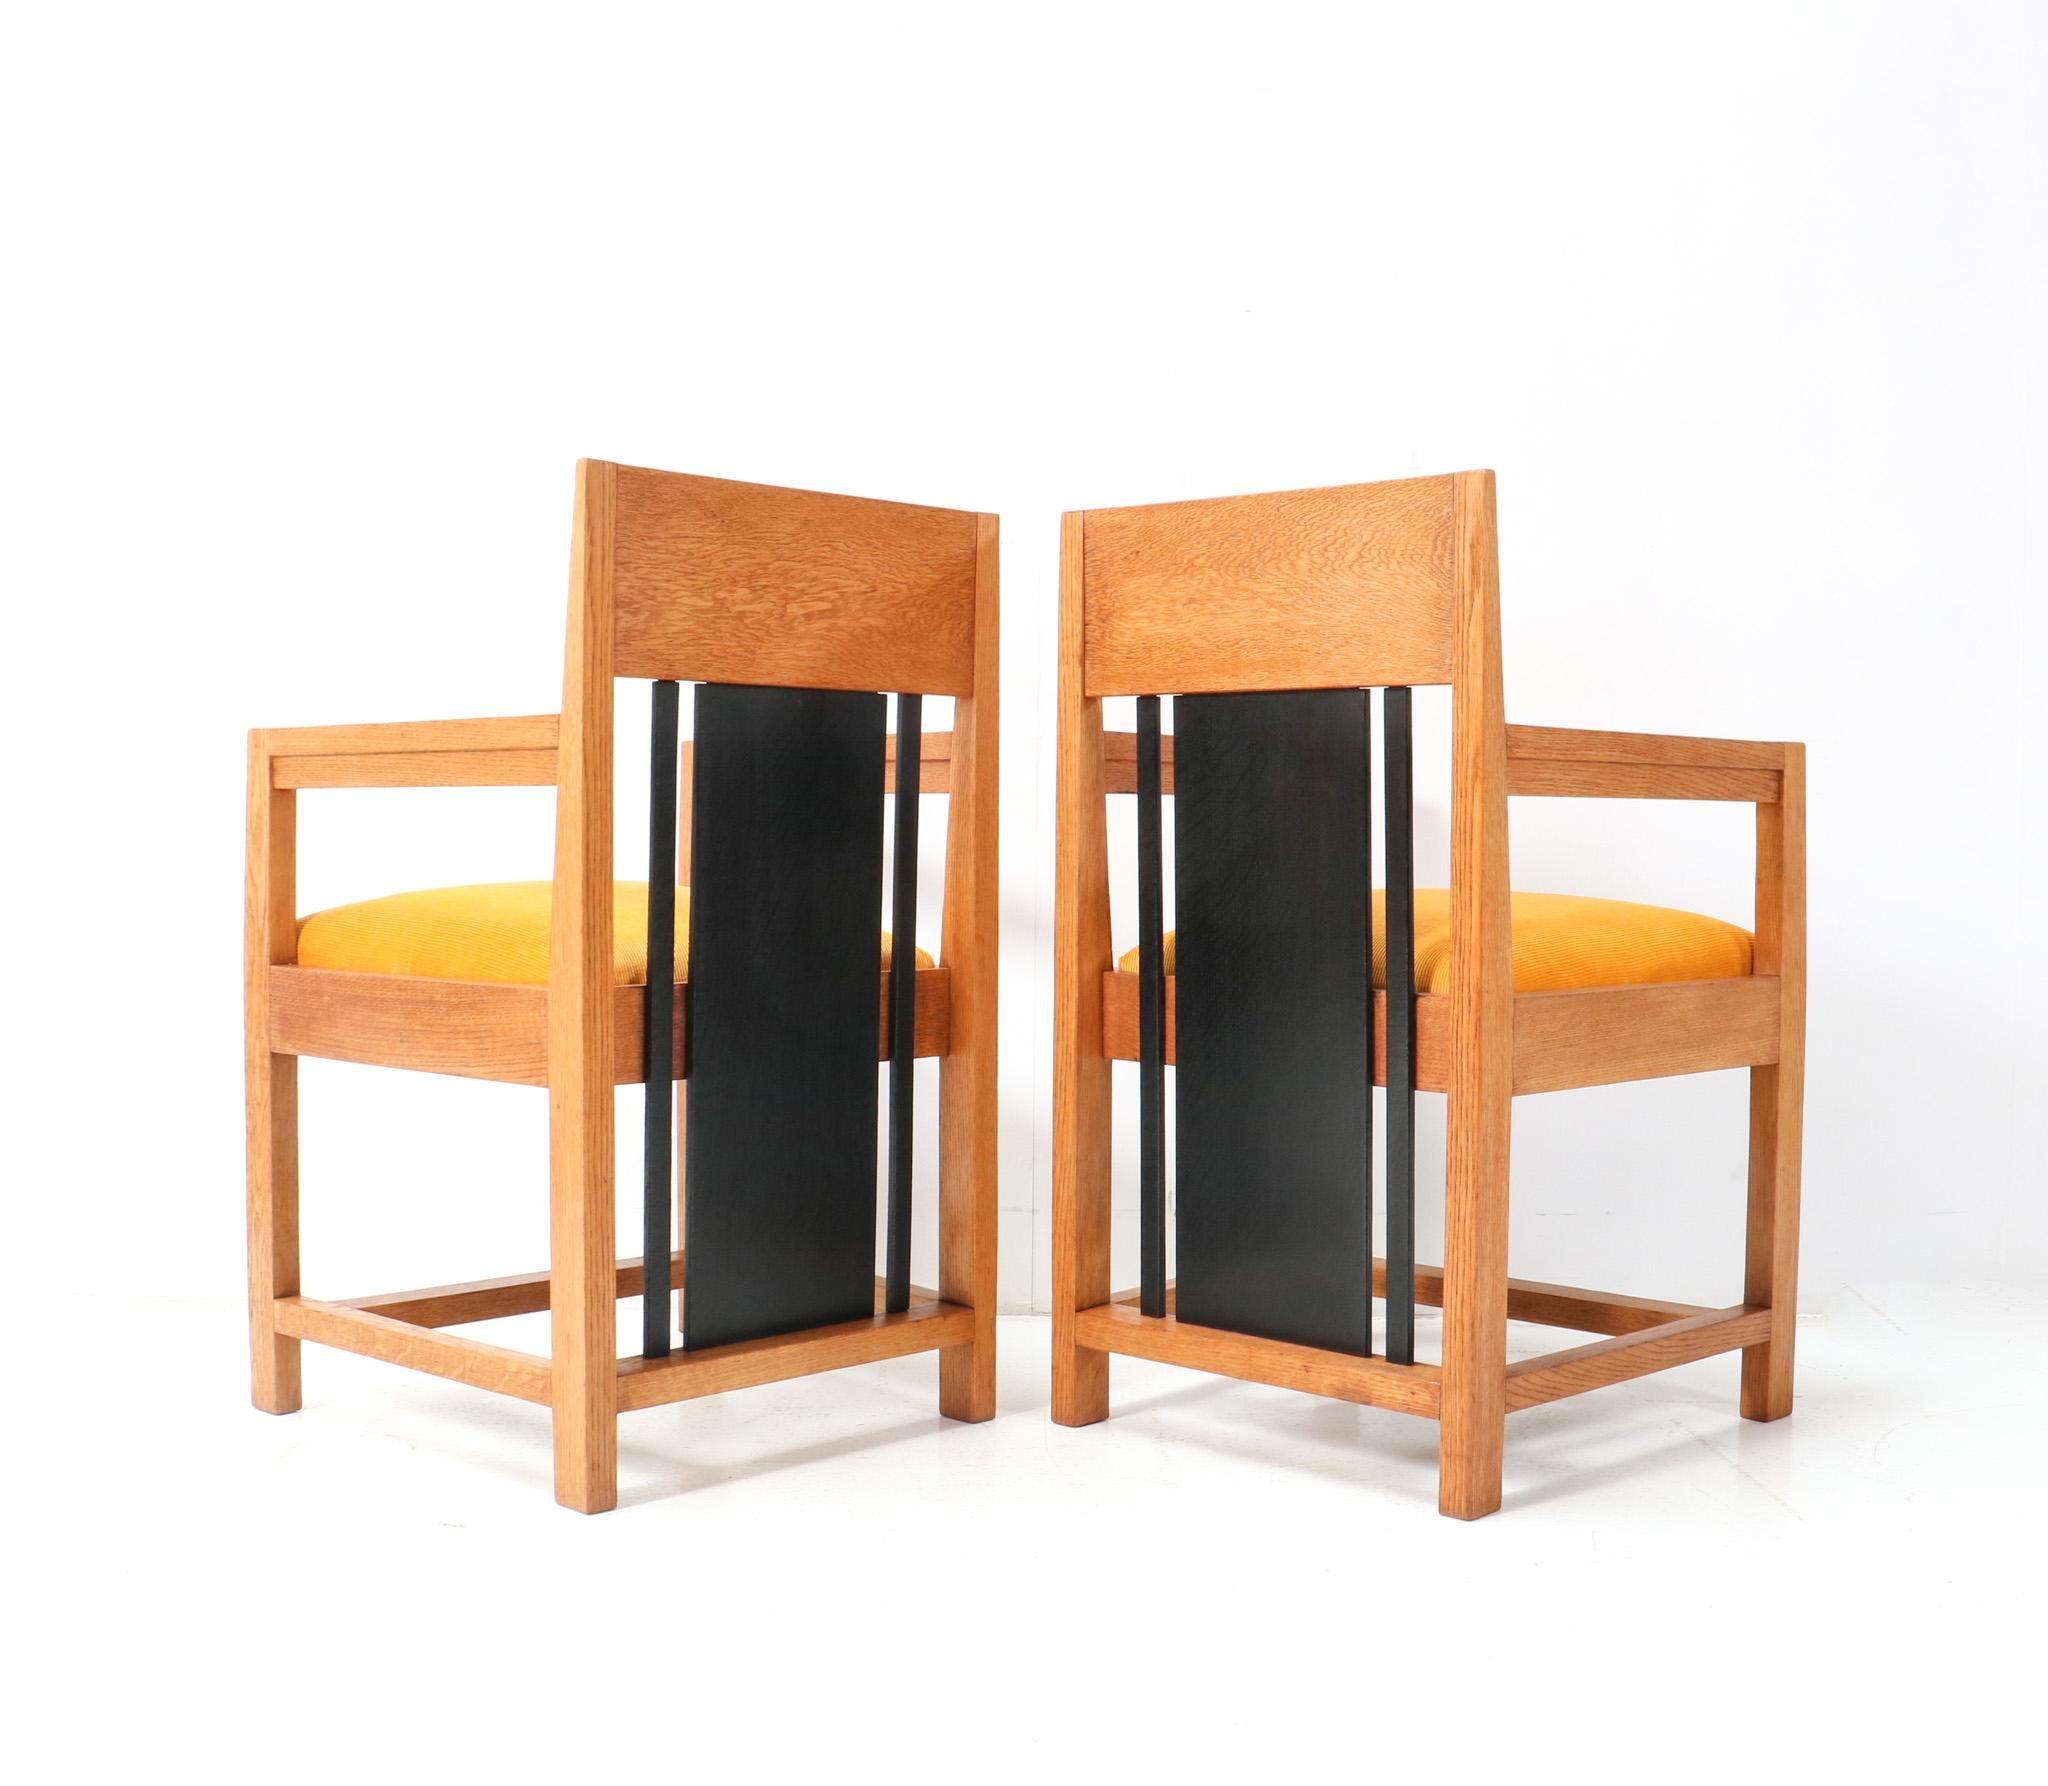 Fabric Two Oak Art Deco Modernist High Back  Armchairs by Cor Alons, 1927 For Sale